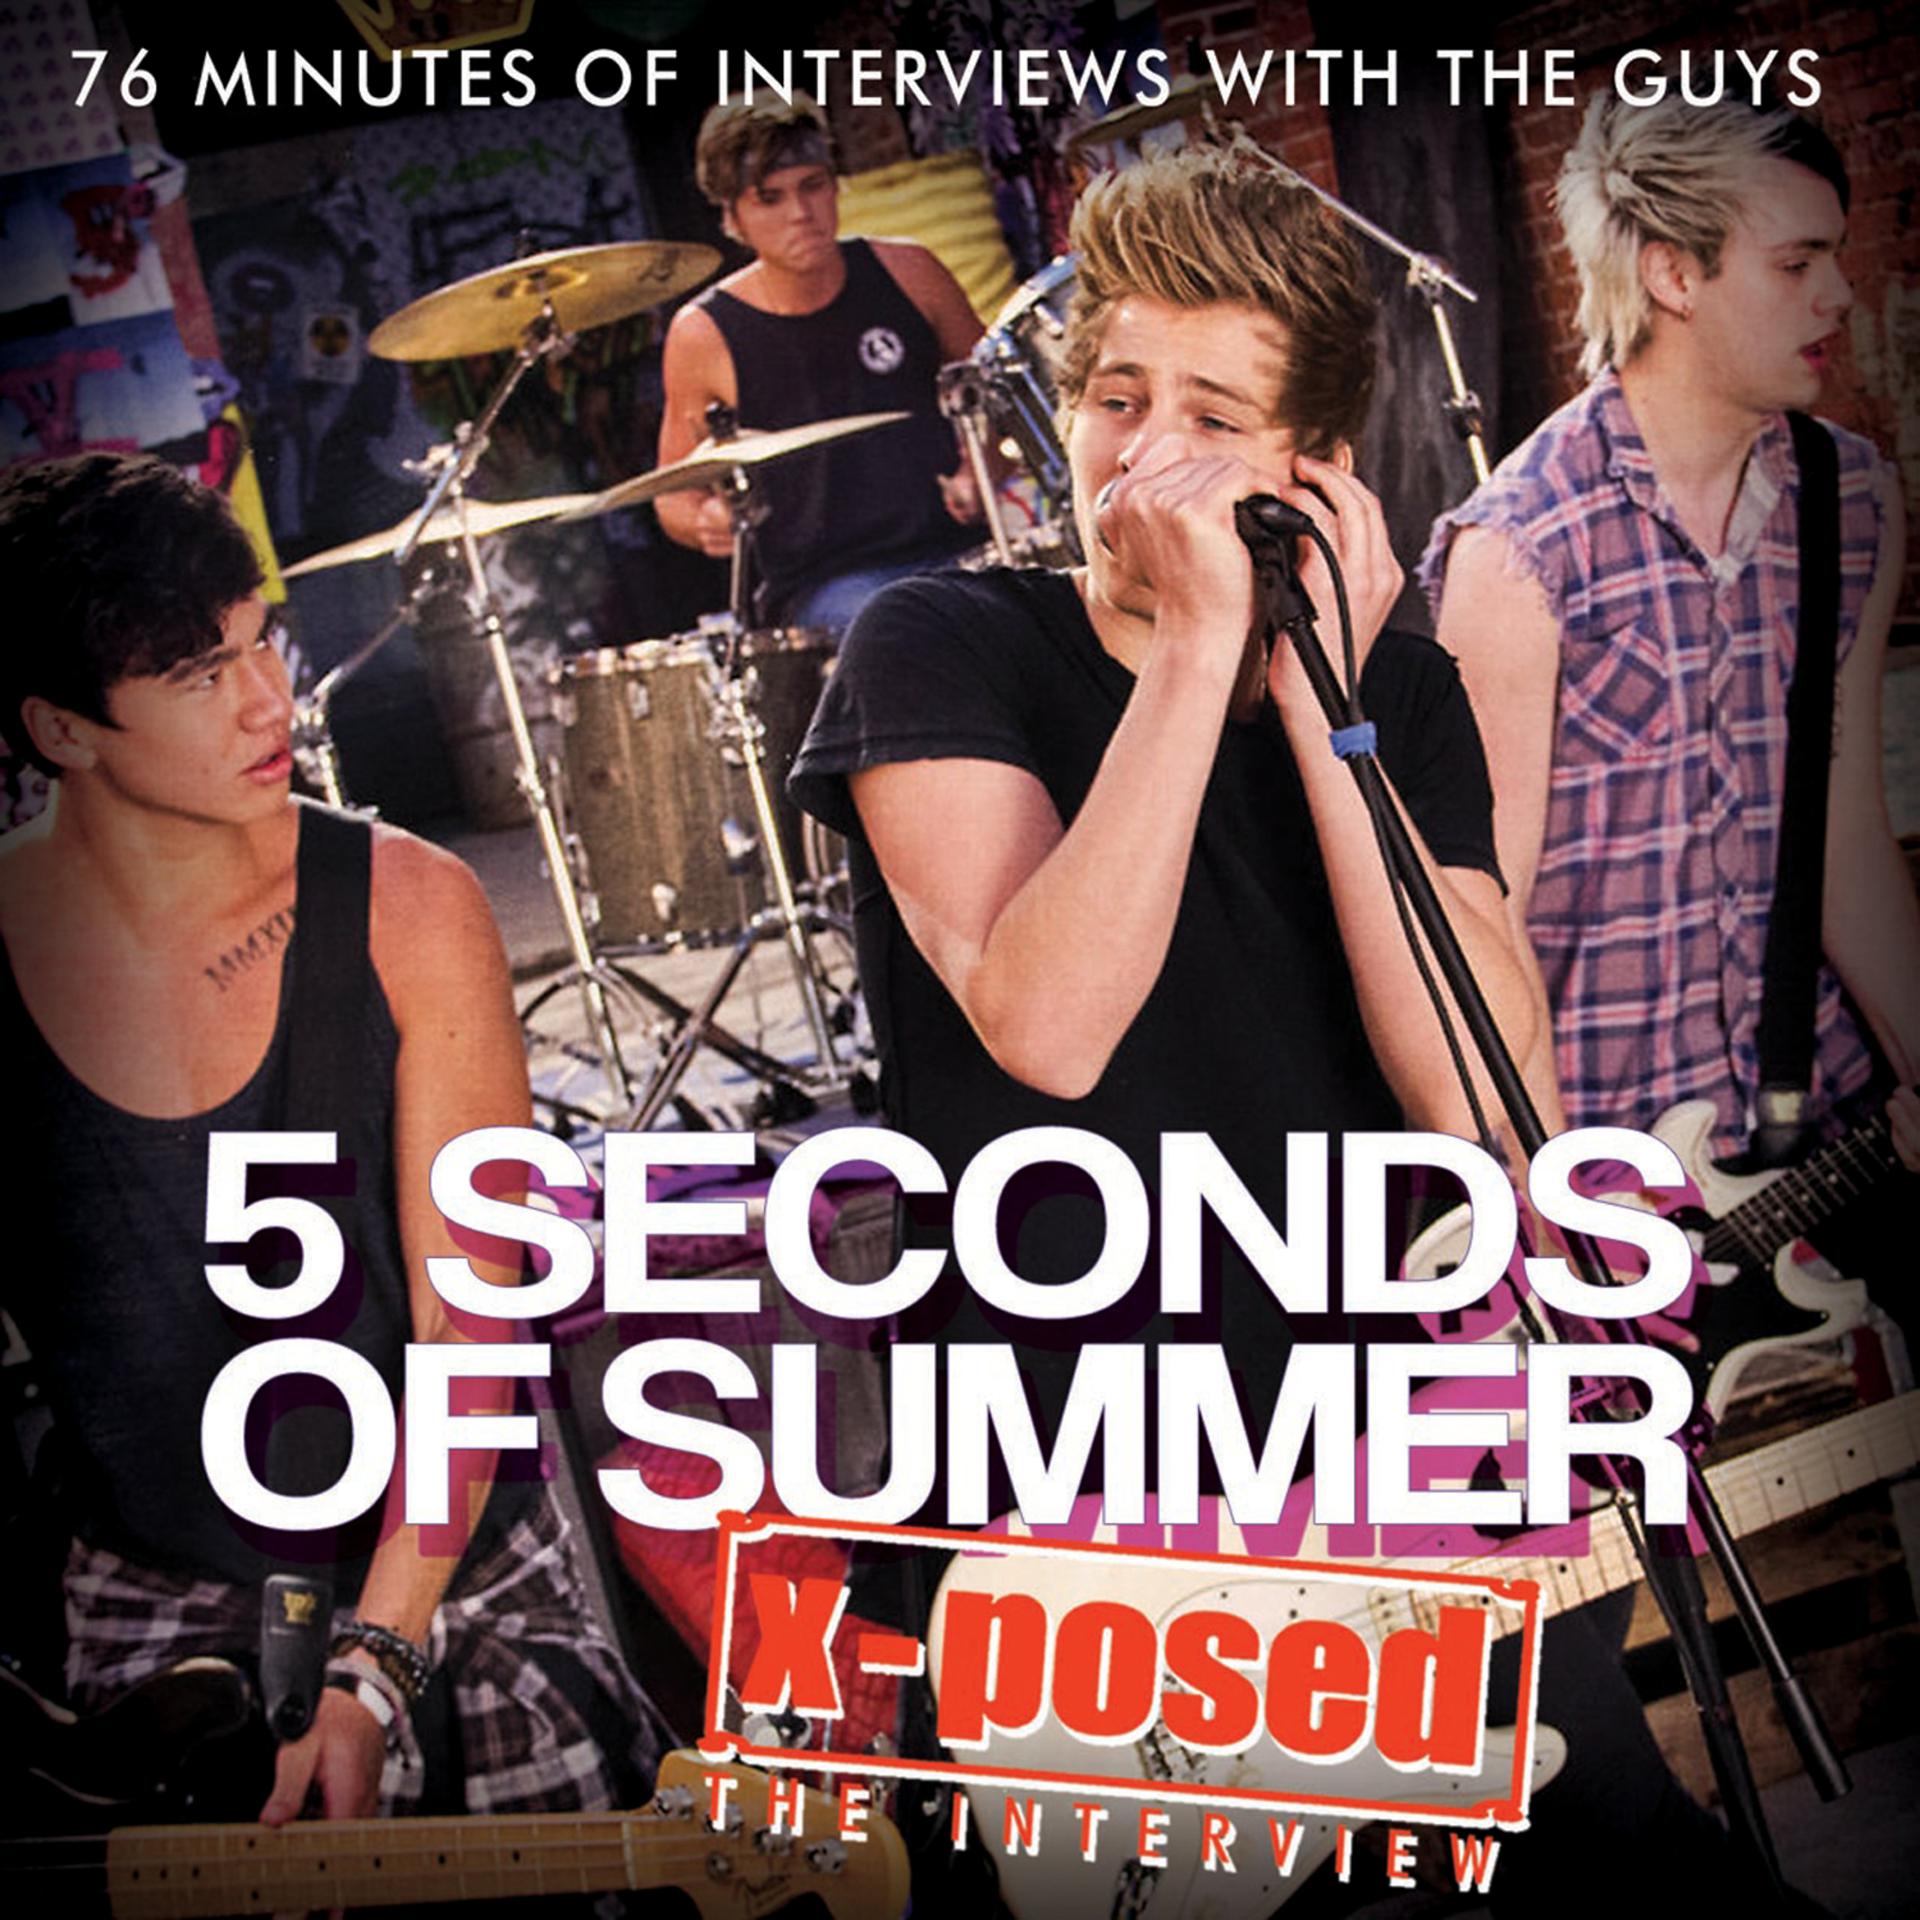 Постер альбома 5 Seconds of Summer X-Posed: The Interview